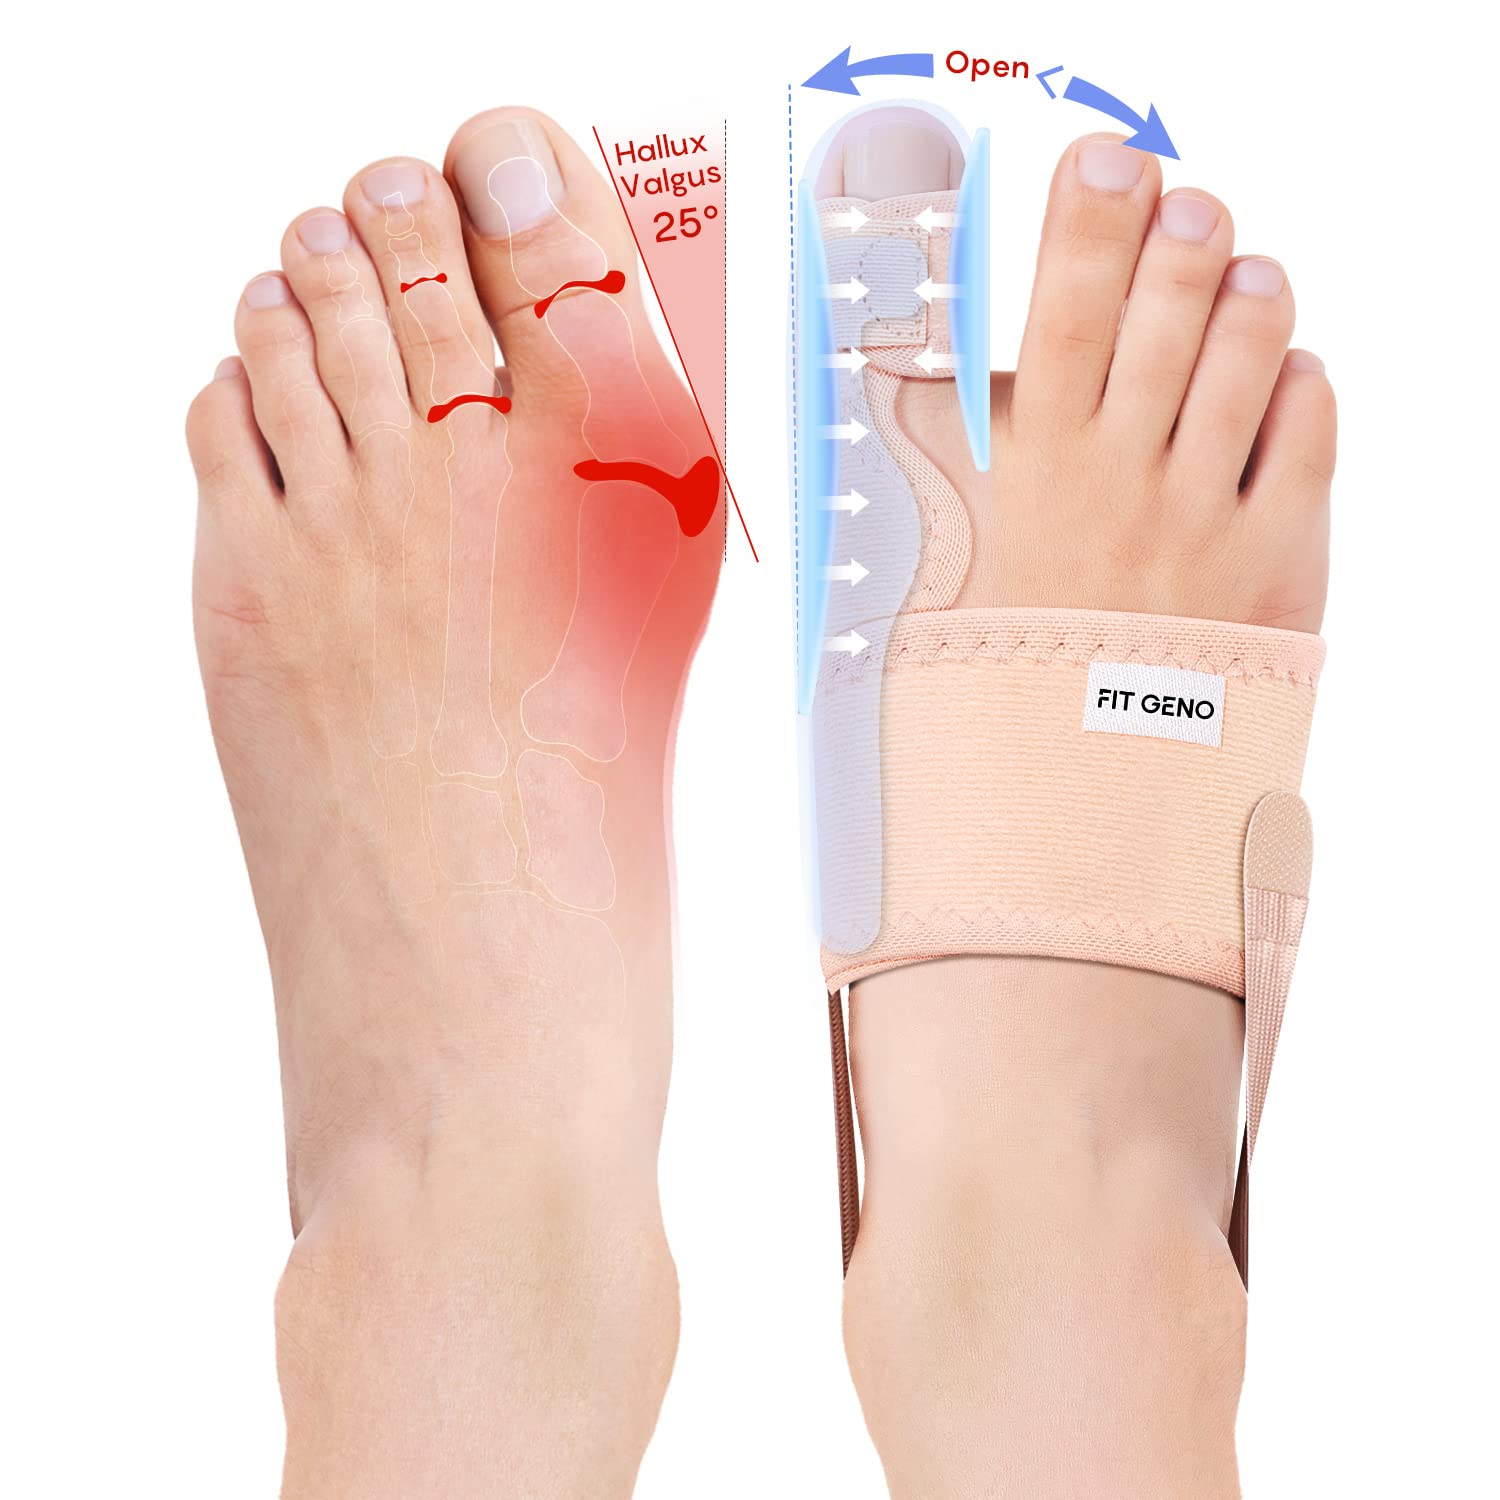 No more bunion discomfort with Fitgeno's incredible bunion